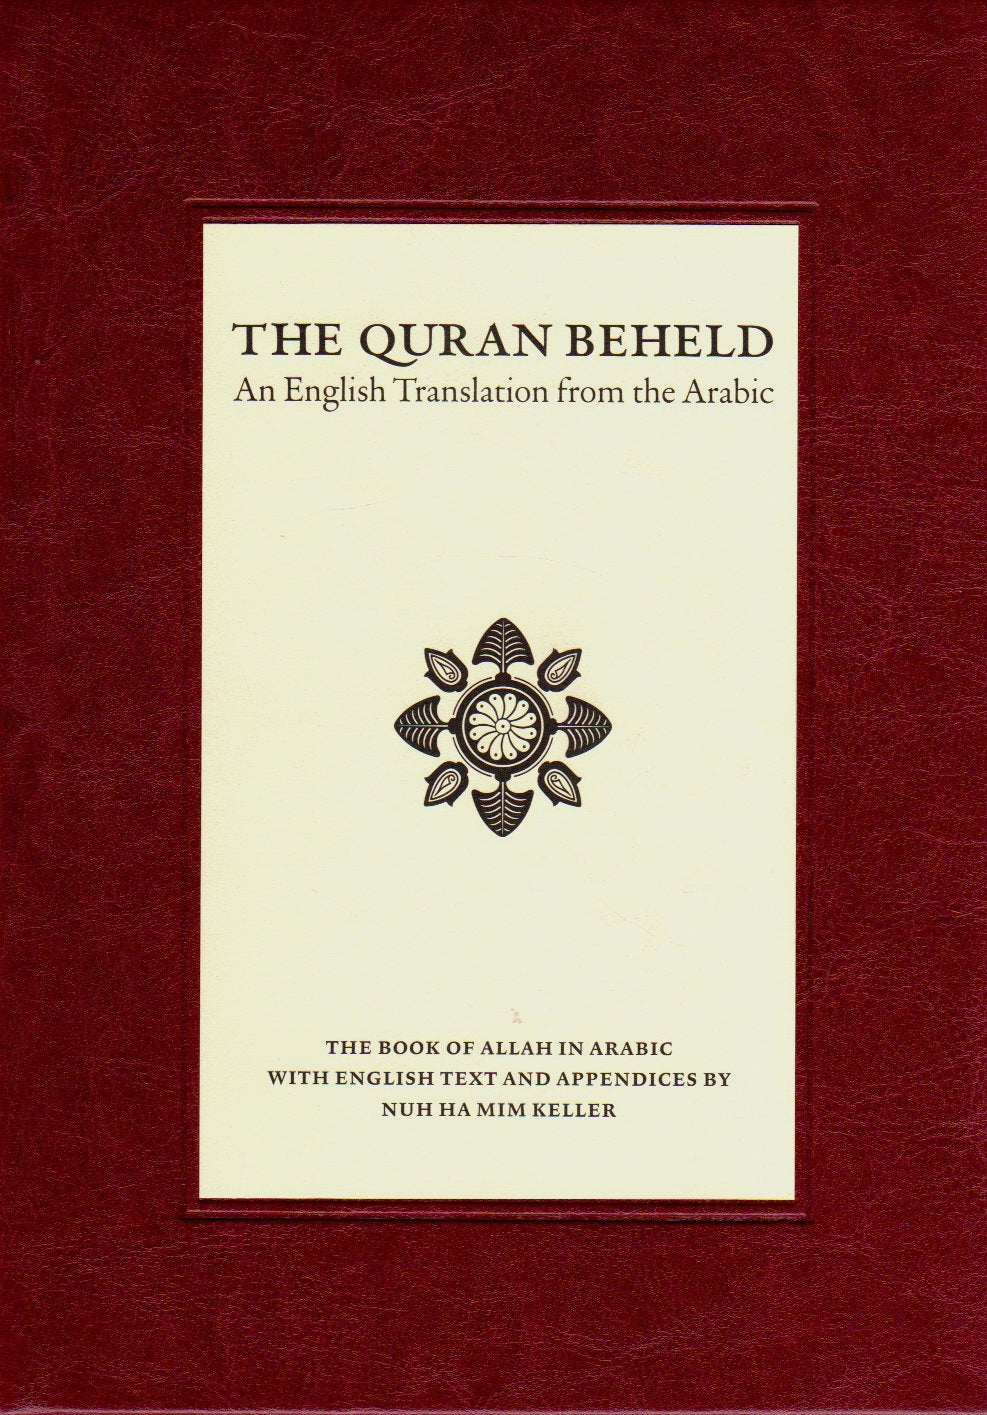 The Quran Beheld - A Quran Translation by Nuh Ha Mim Keller - With cover